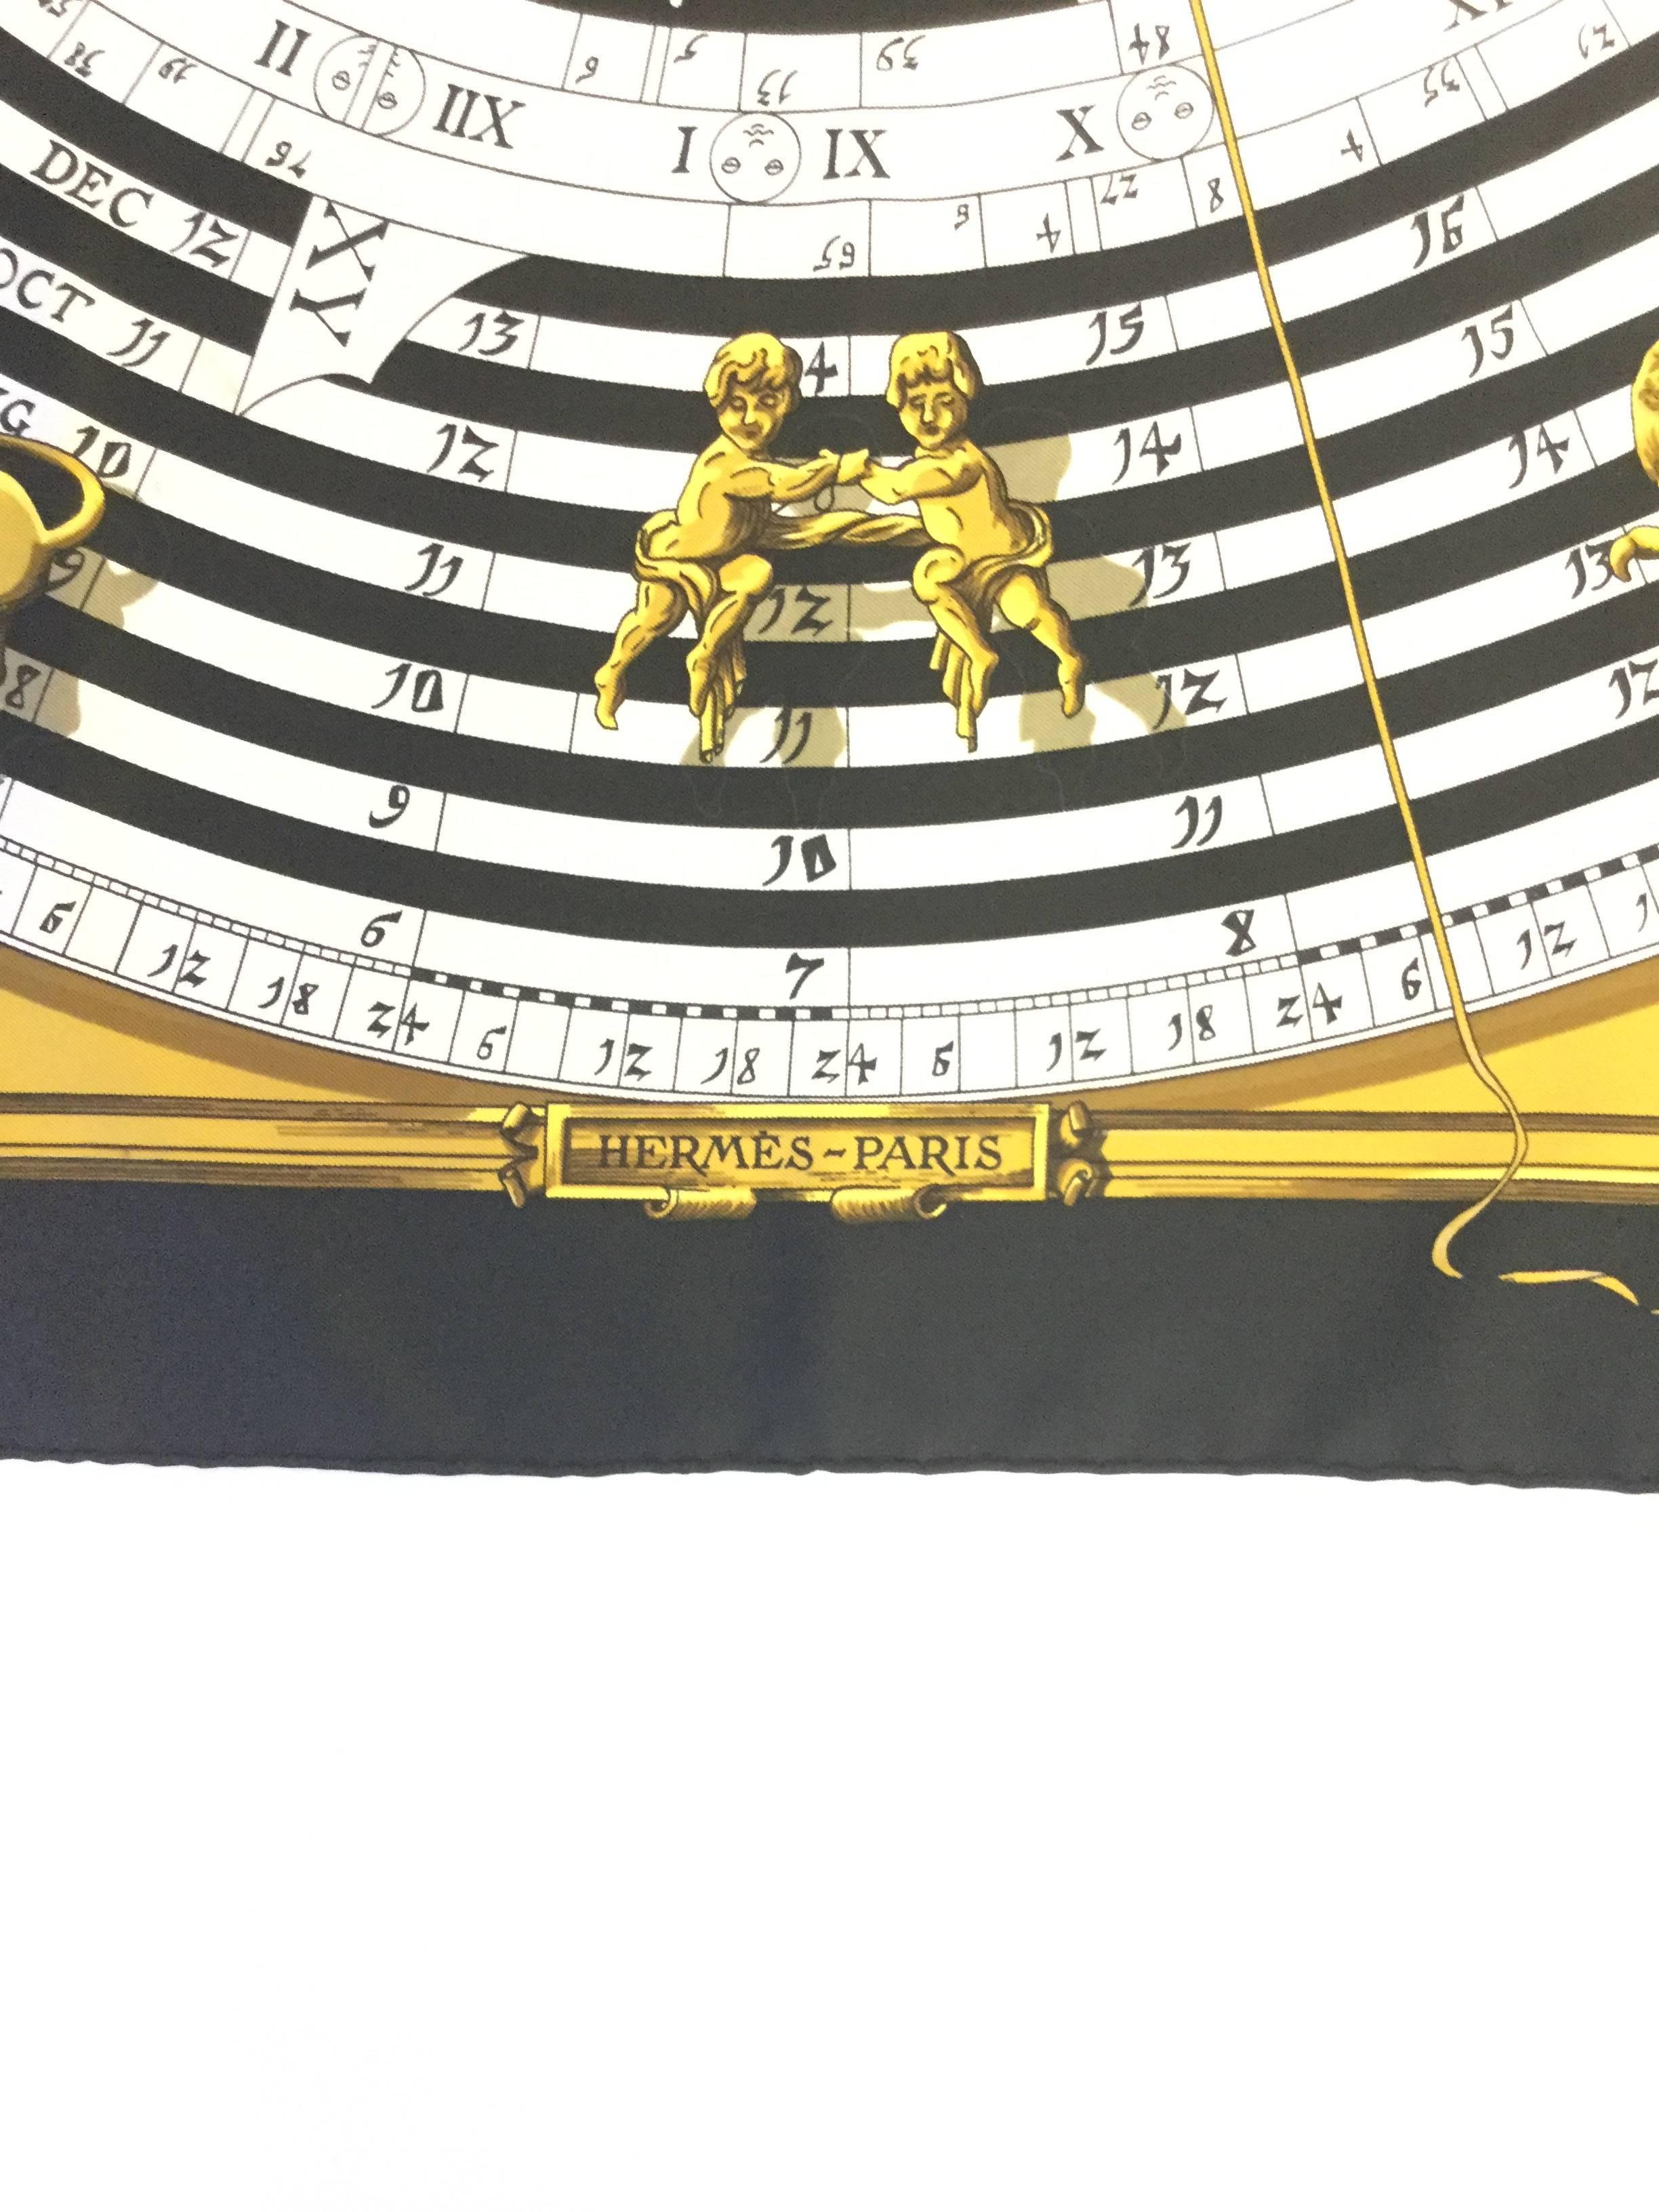 Iconic silk scarf by Hermes! The scarf, titled "Astrologie" or also known as & "Dies et Hors" or "Days and Hours" depicts a circular calendar complete with astrological signs. The scarf first rose to fame when